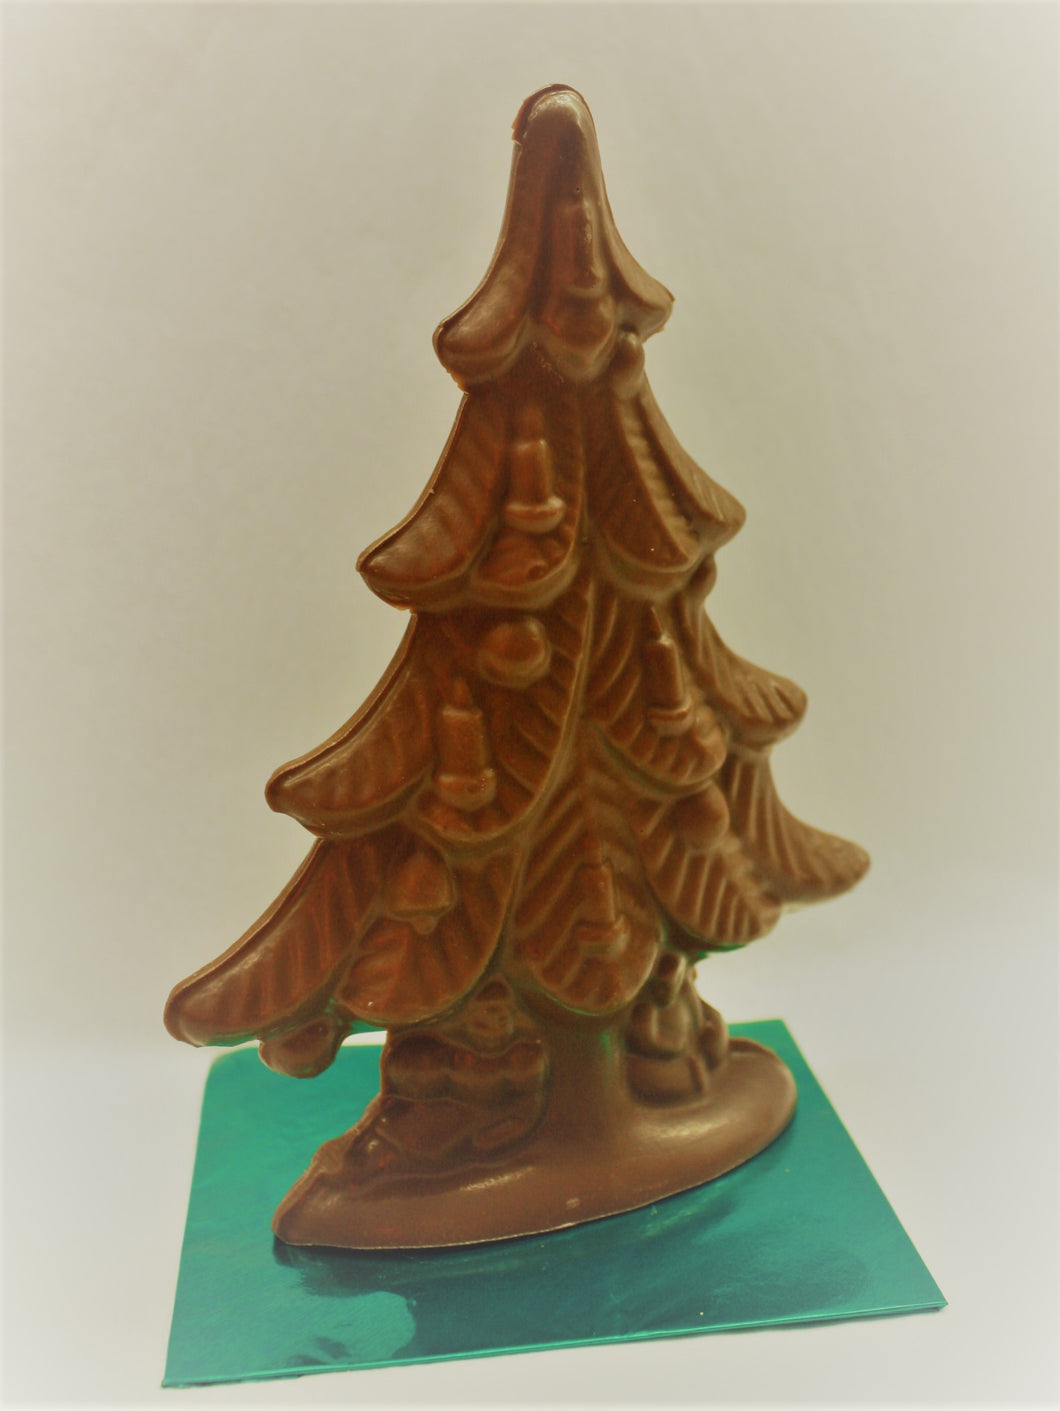 Christmas Tree - Solid - Peterson's Candies